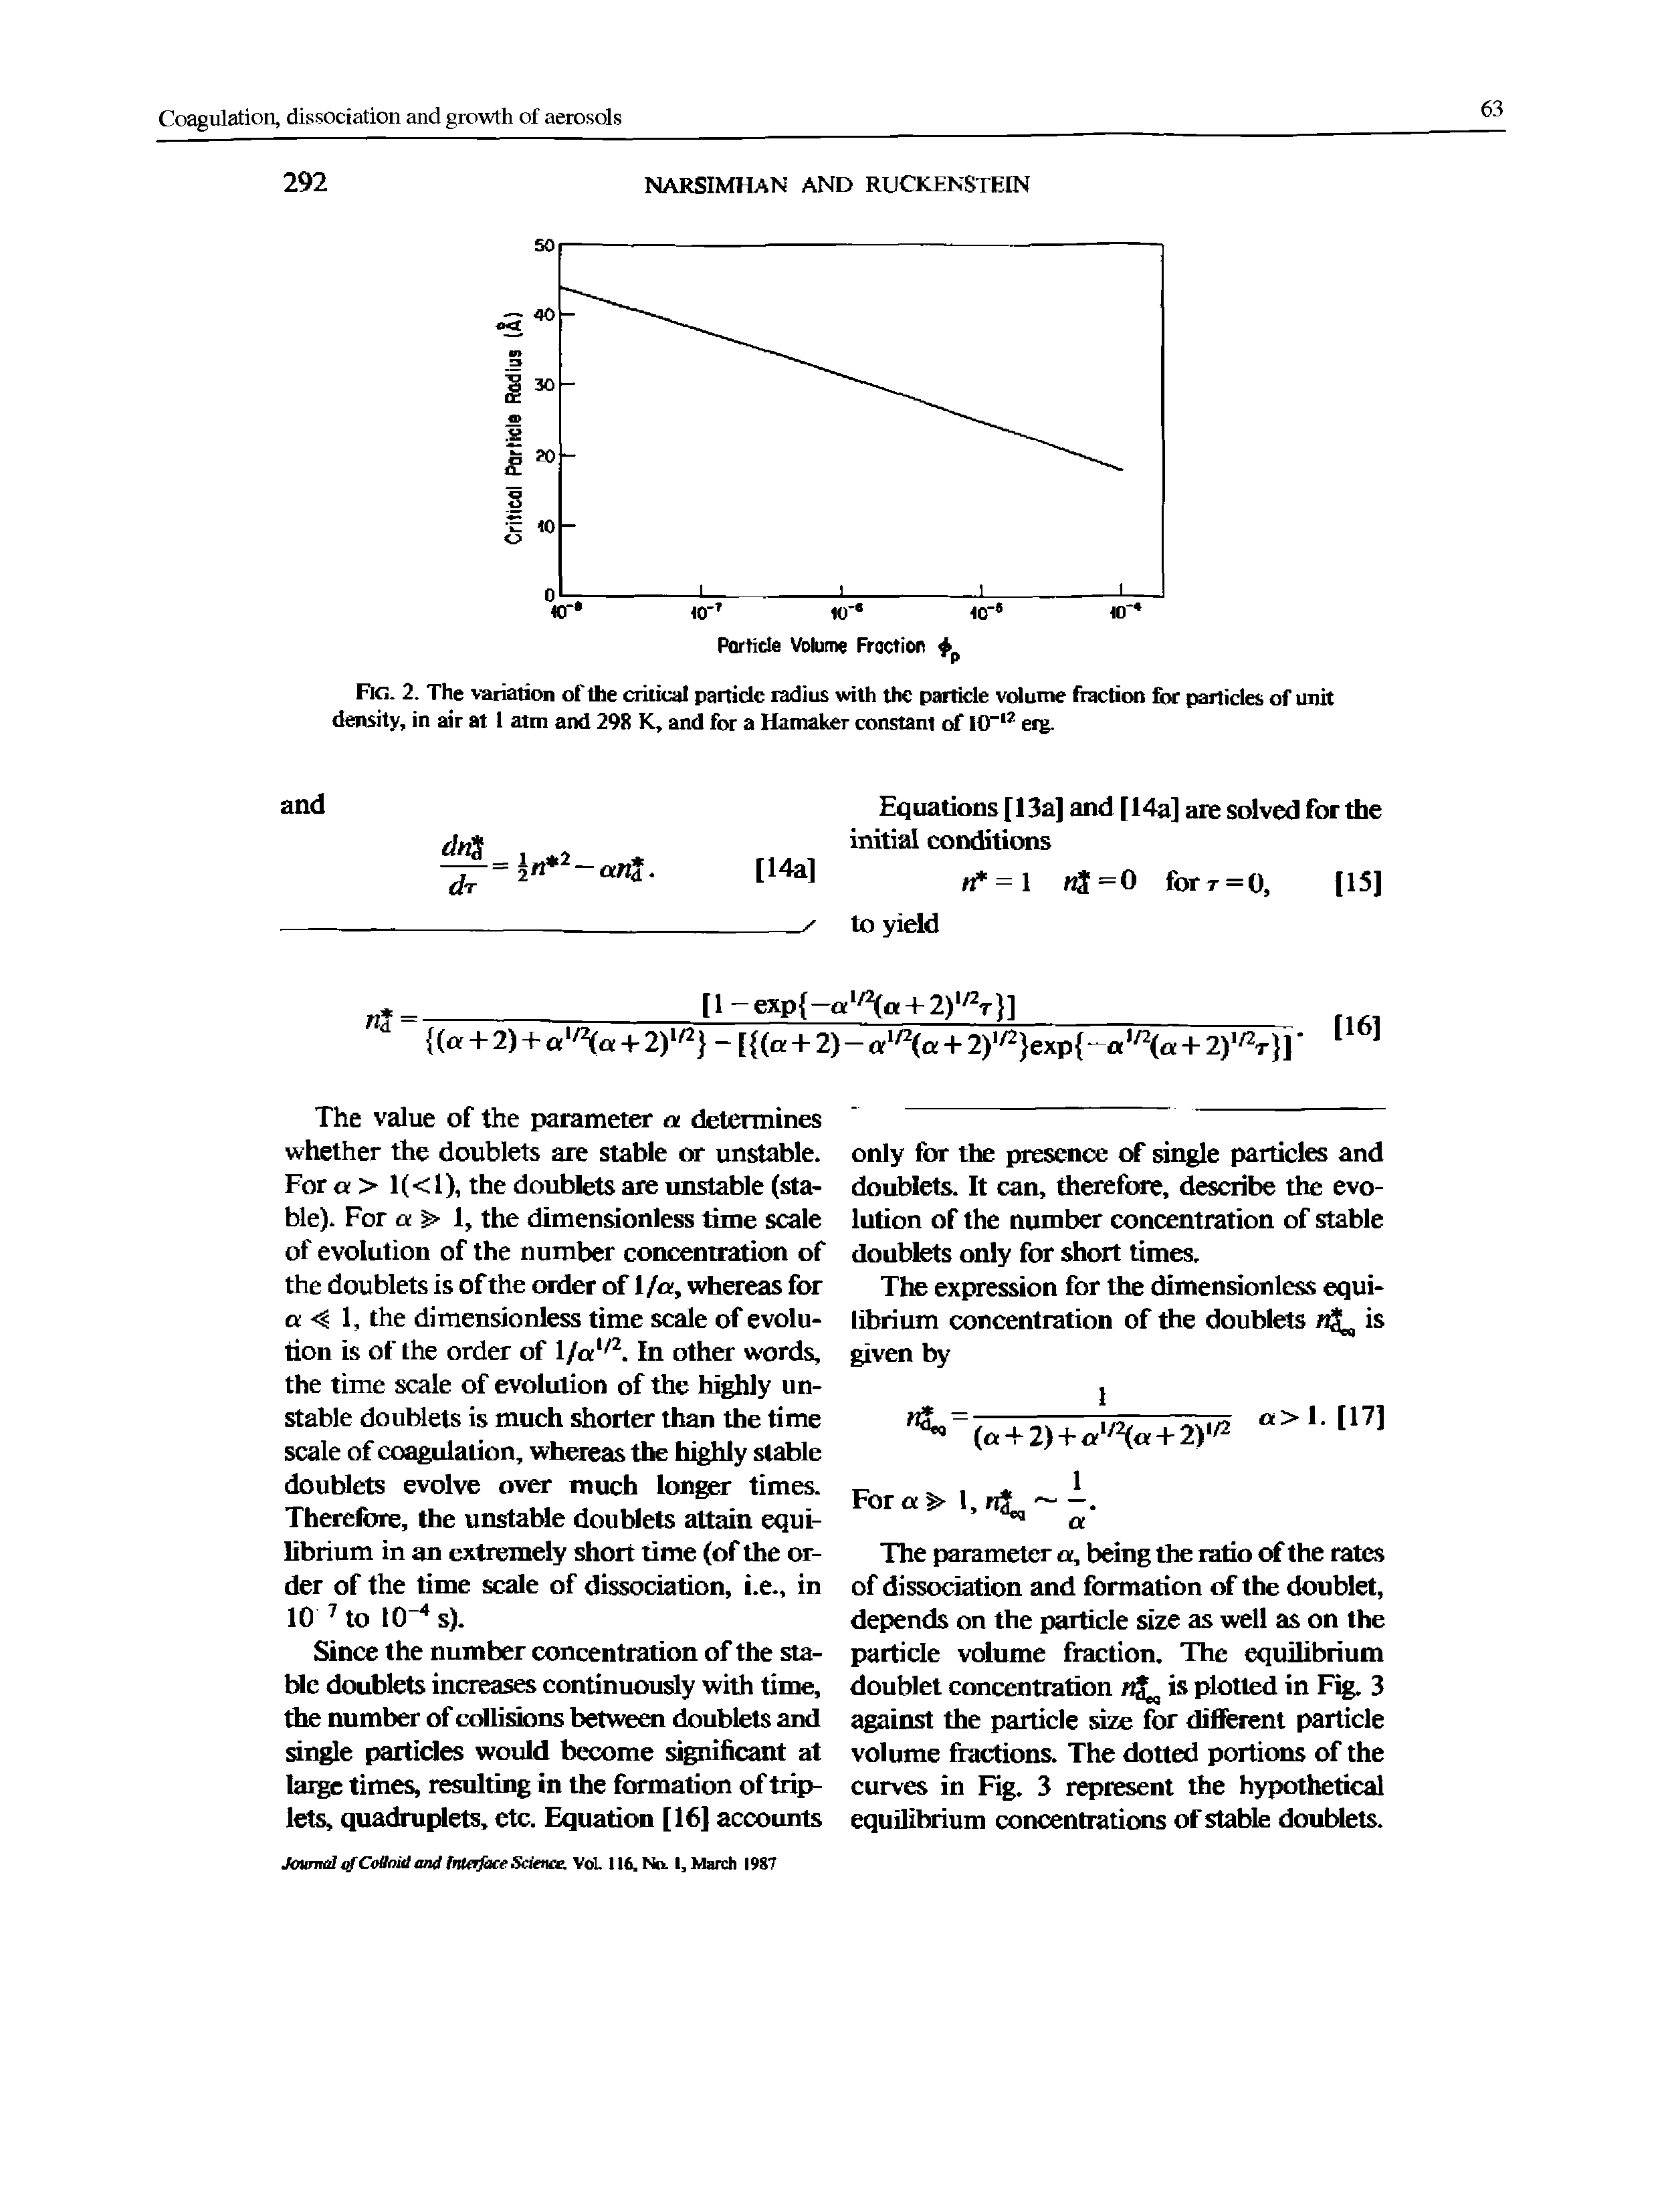 Fig. 2. The variation of the critical particle radius with the particle volume fraction for particles of unit density, in air at 1 atm and 298 K, and for a Hamaker constant of I0-12 erg.